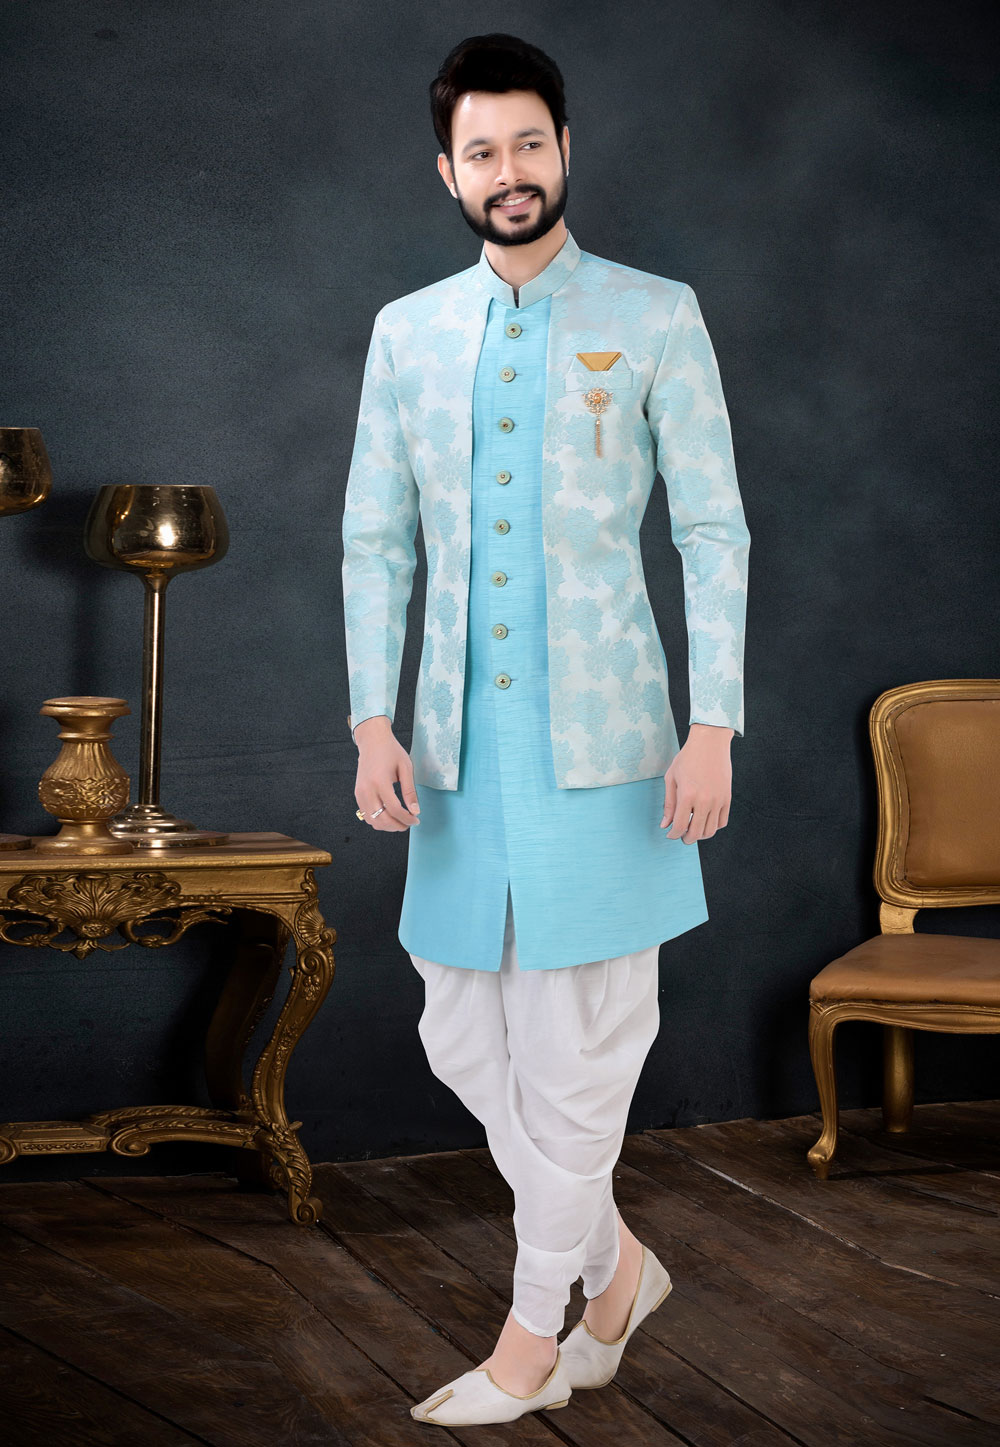 What to Wear to an Indian Wedding as a Guest - hitched.co.uk